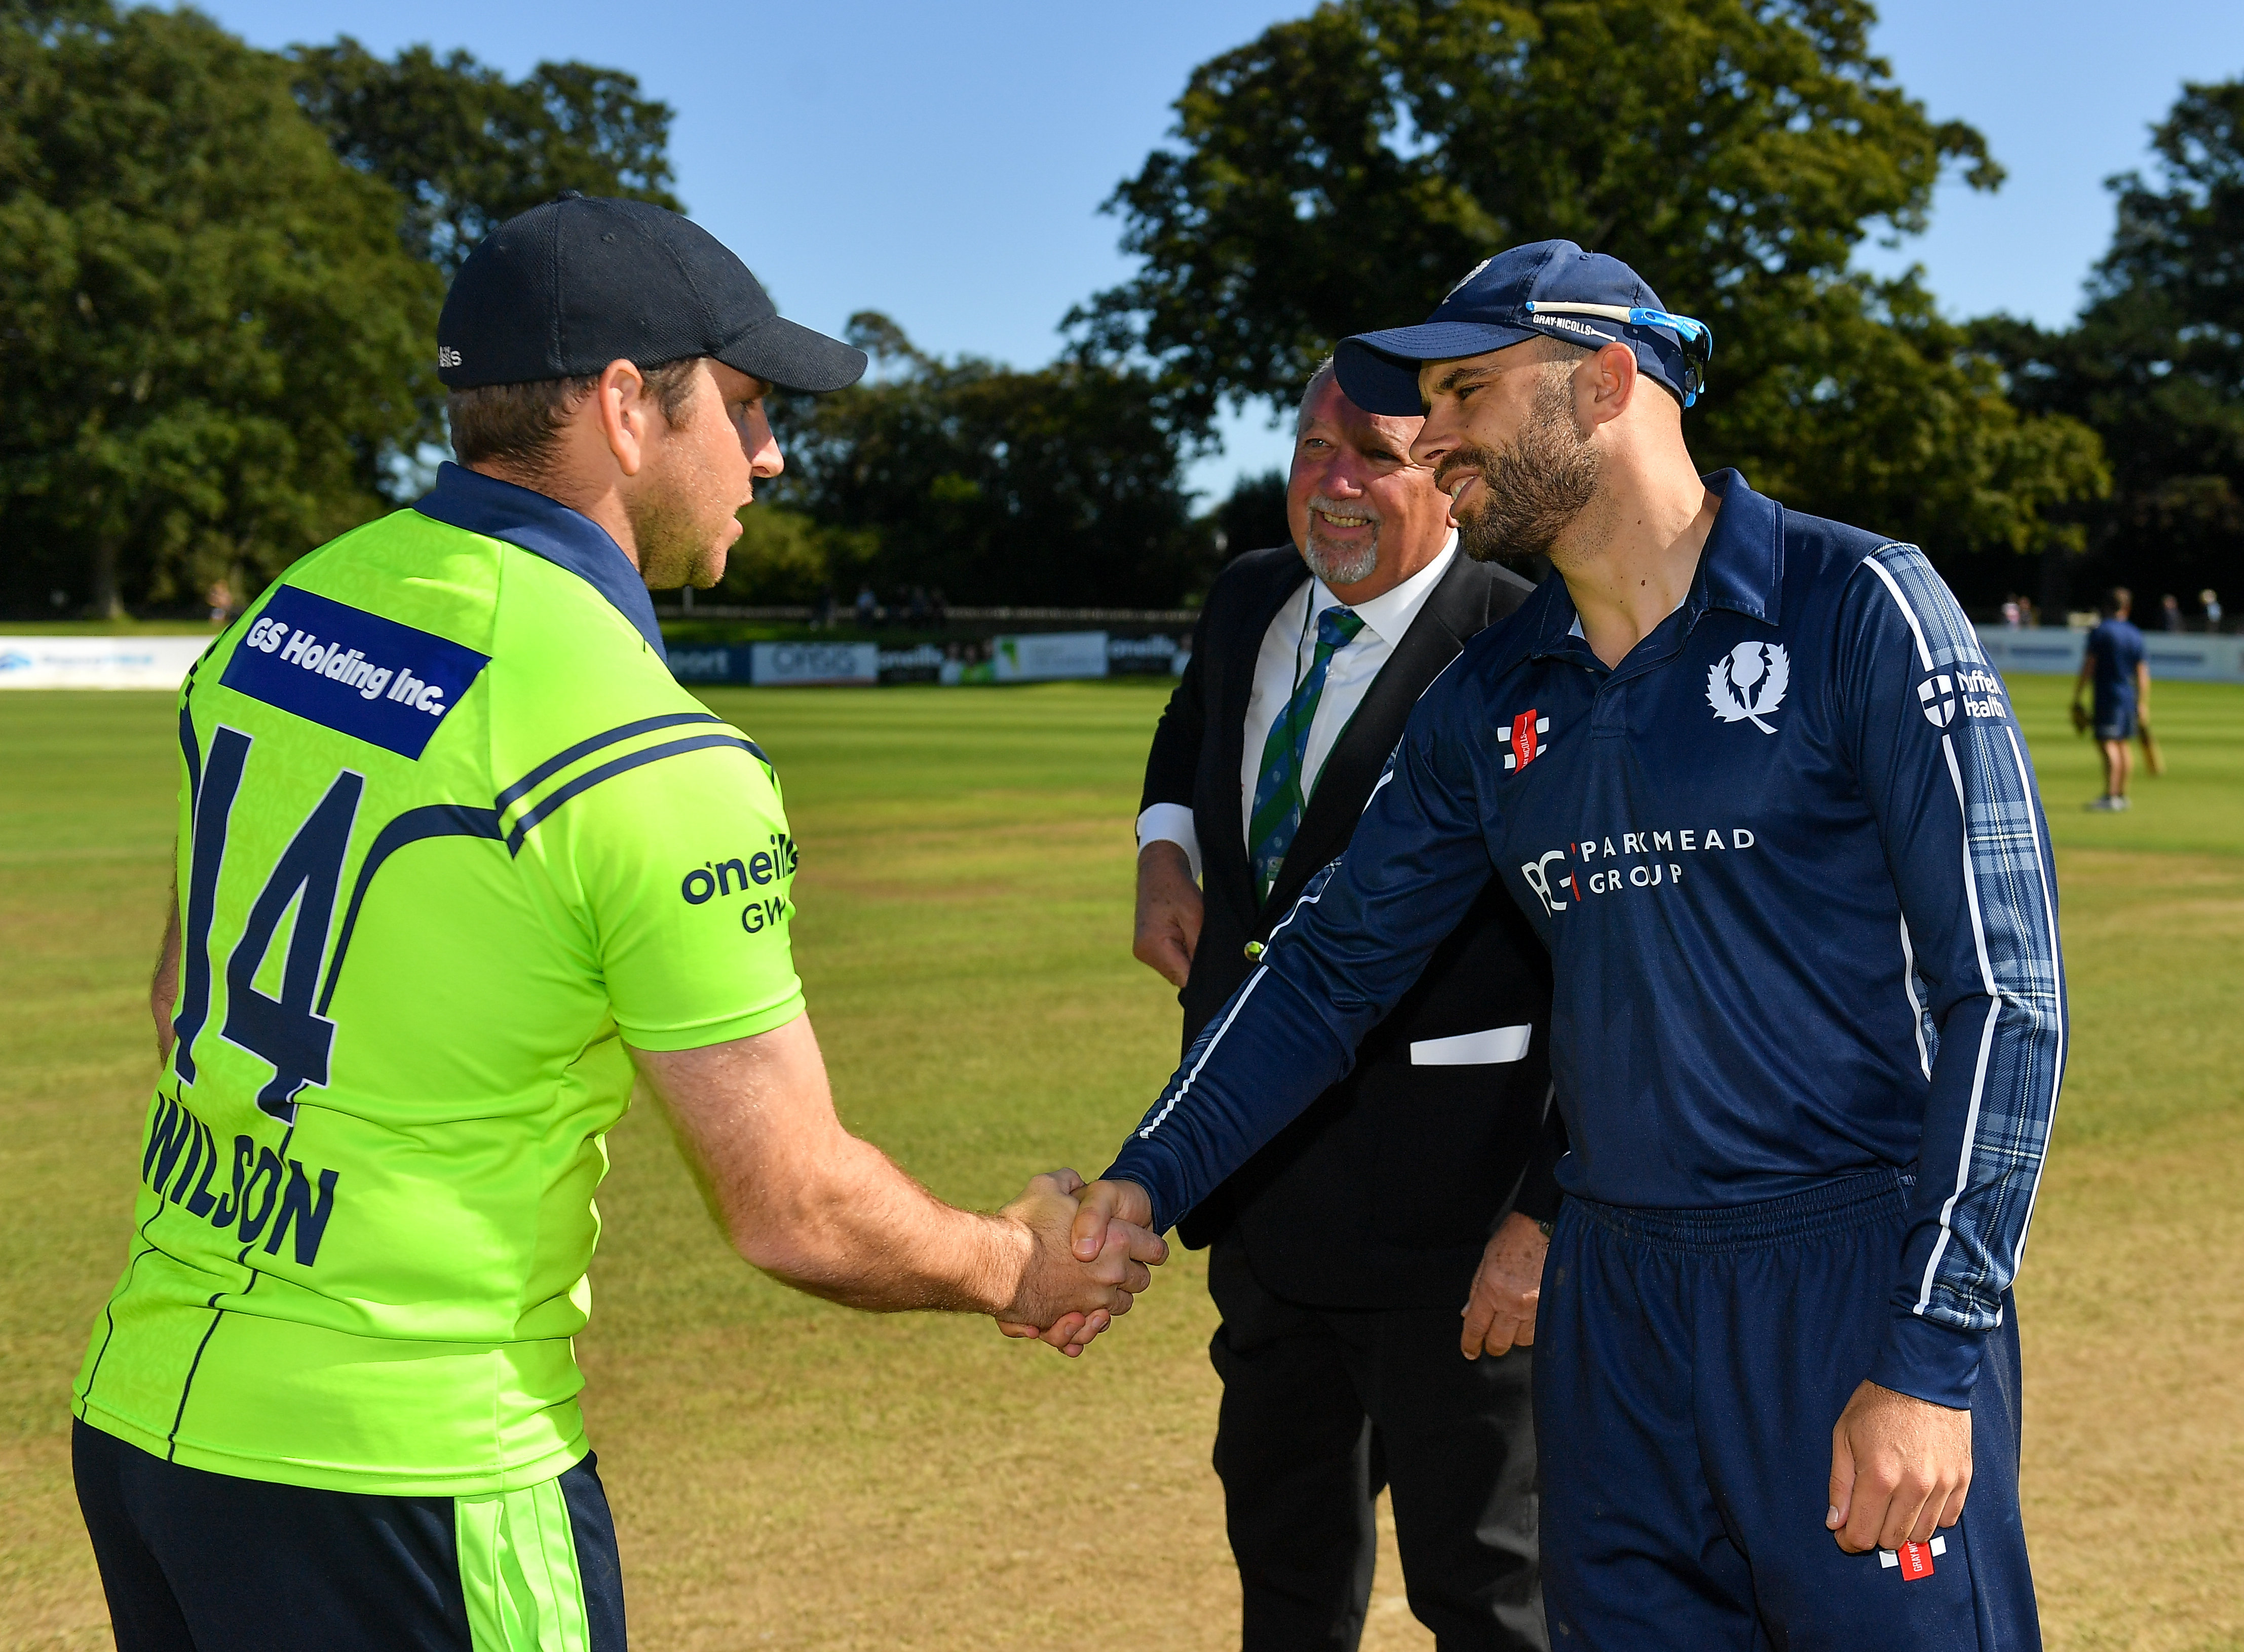 Scotland suffer 4-wicket loss in high-scoring T20I against Ireland